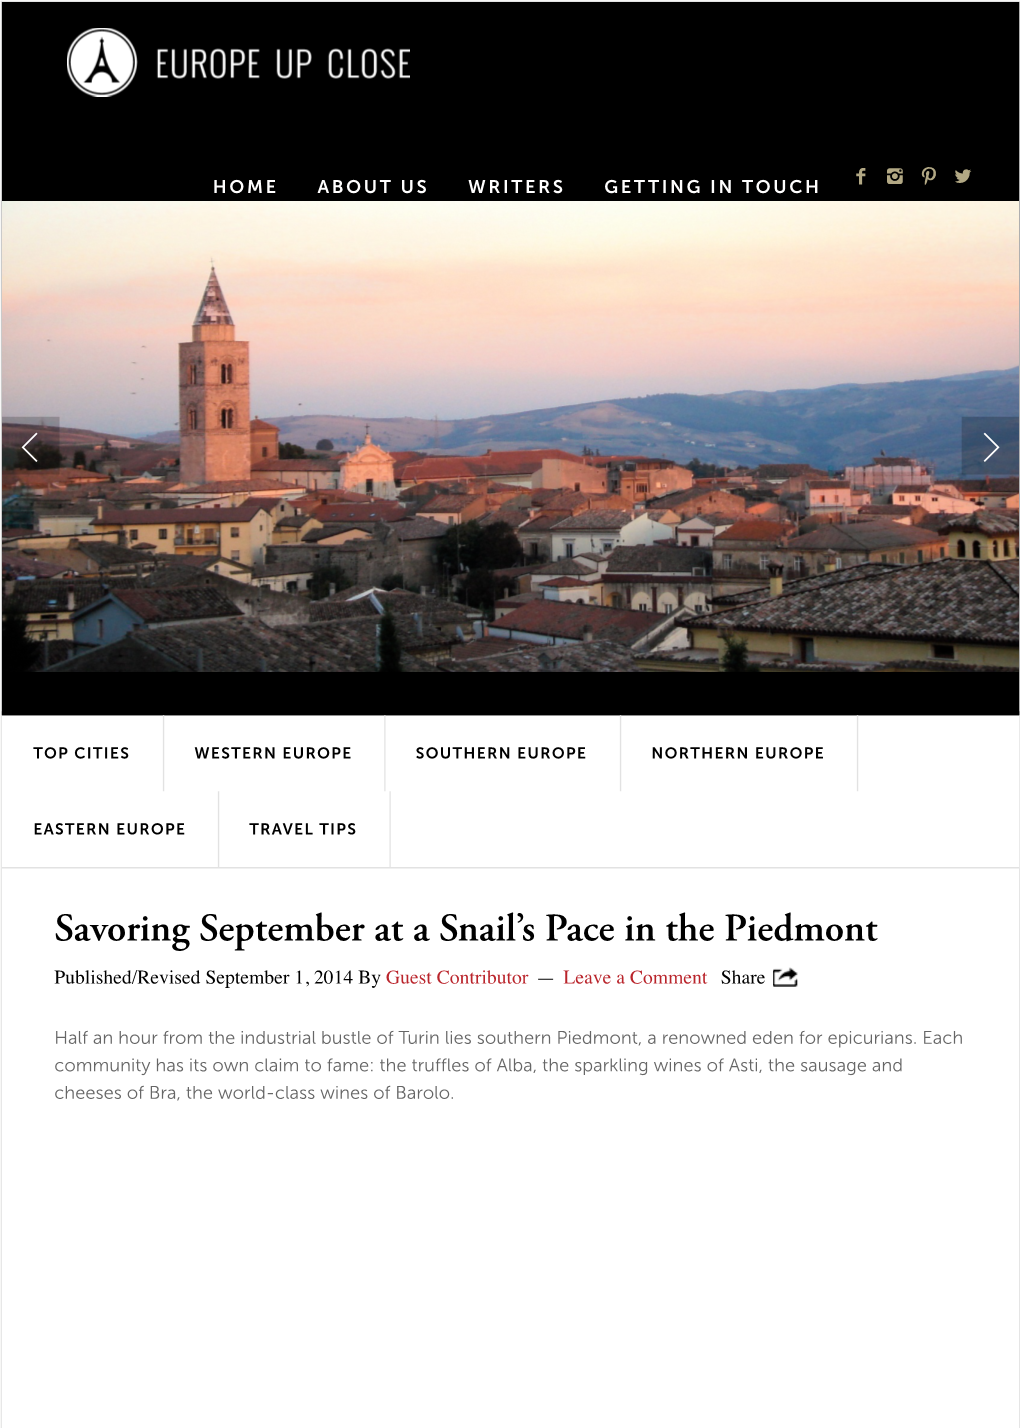 Savoring September at a Snail's Pace in the Piedmont